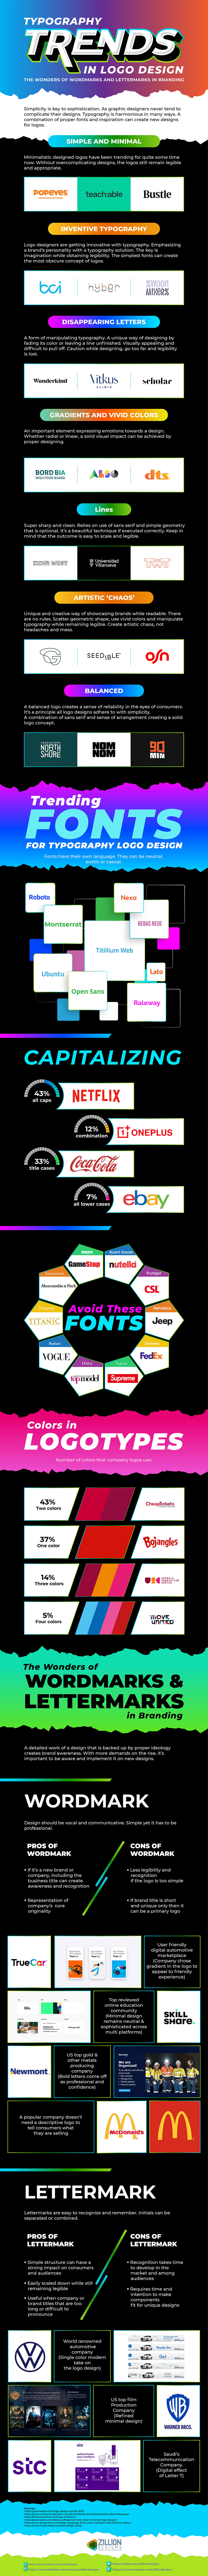 typography trends in Logos